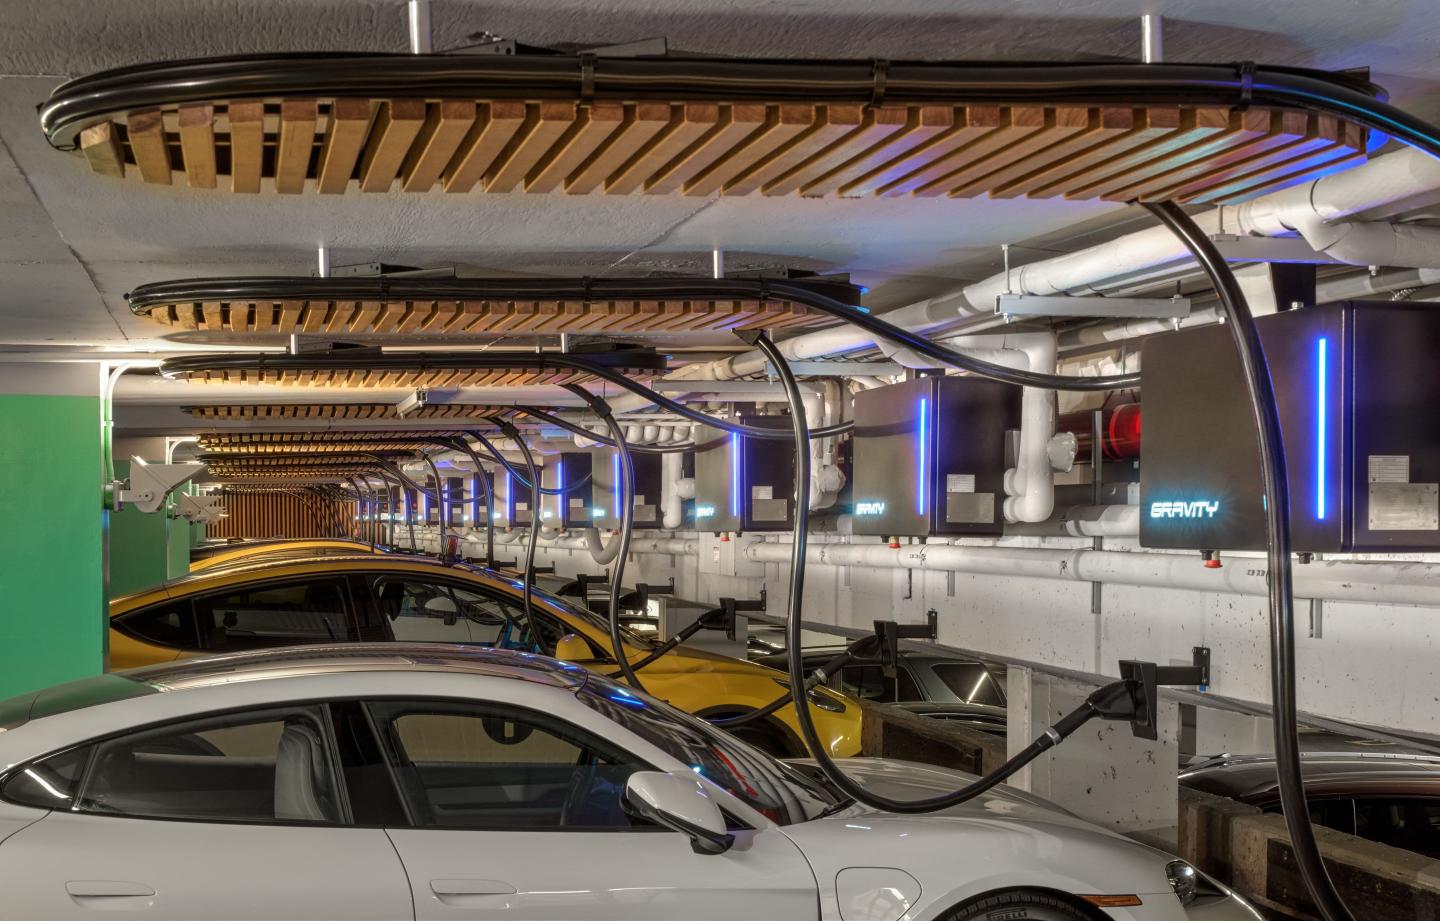 A row of electric cars plugged into chargers overhead